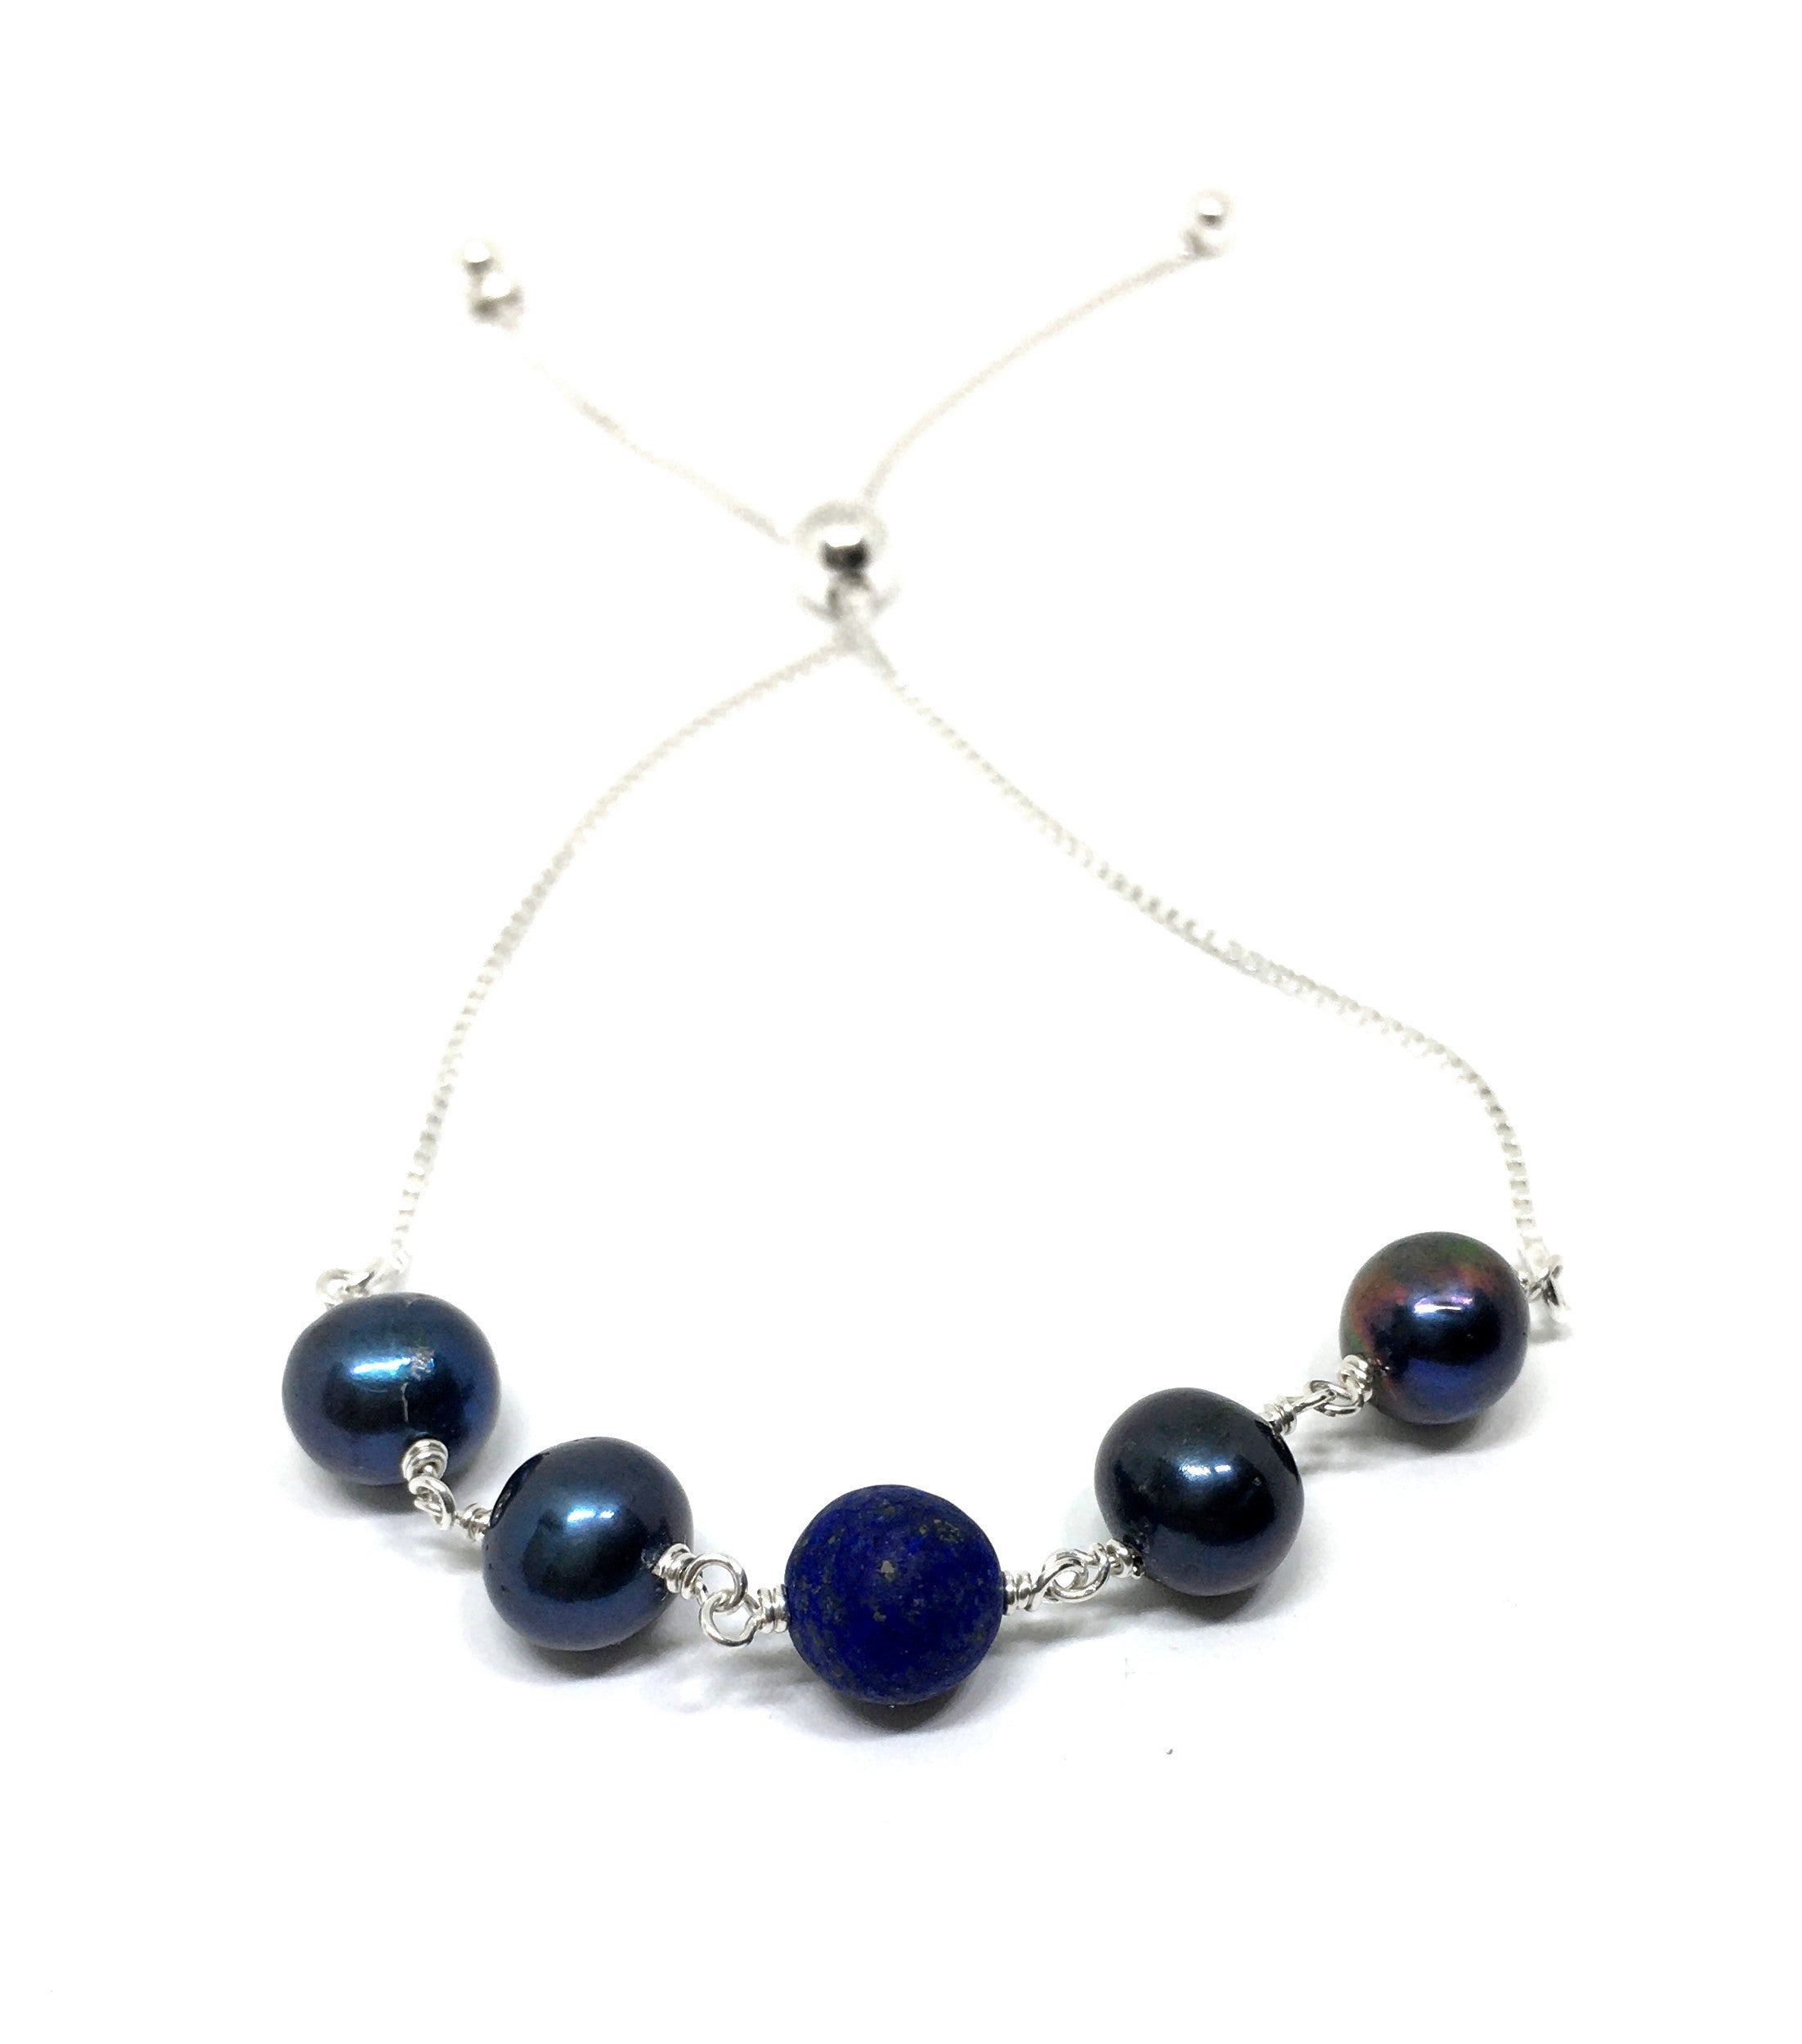 Lapis Lazuli and Black Pearl Bolo Bracelet in Sterling Silver